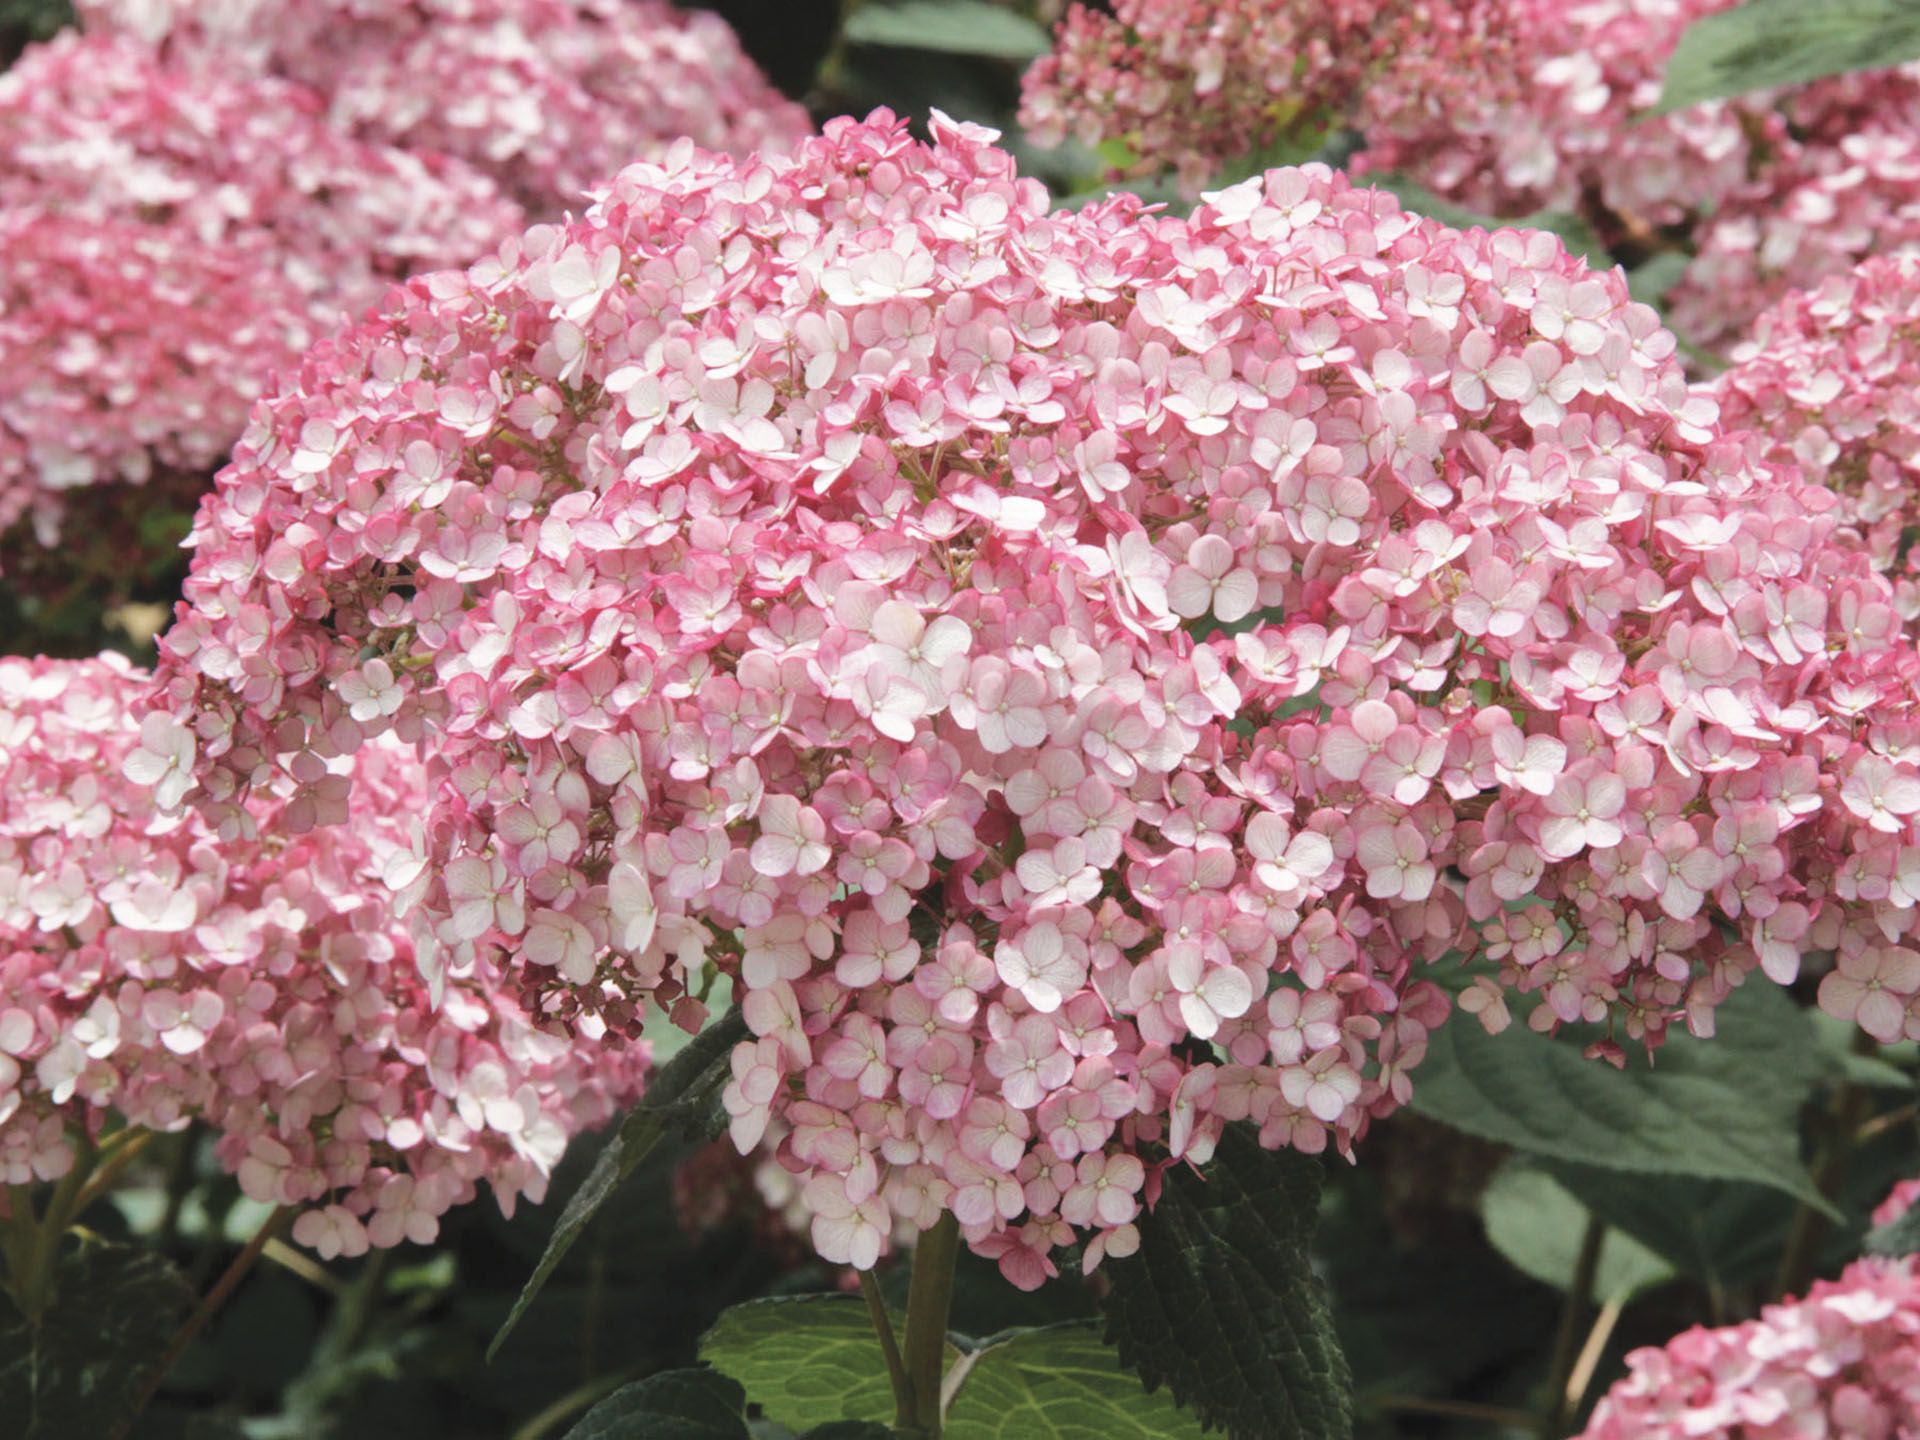 Image of Hydrangea arborescens sweet annabelle in a vase